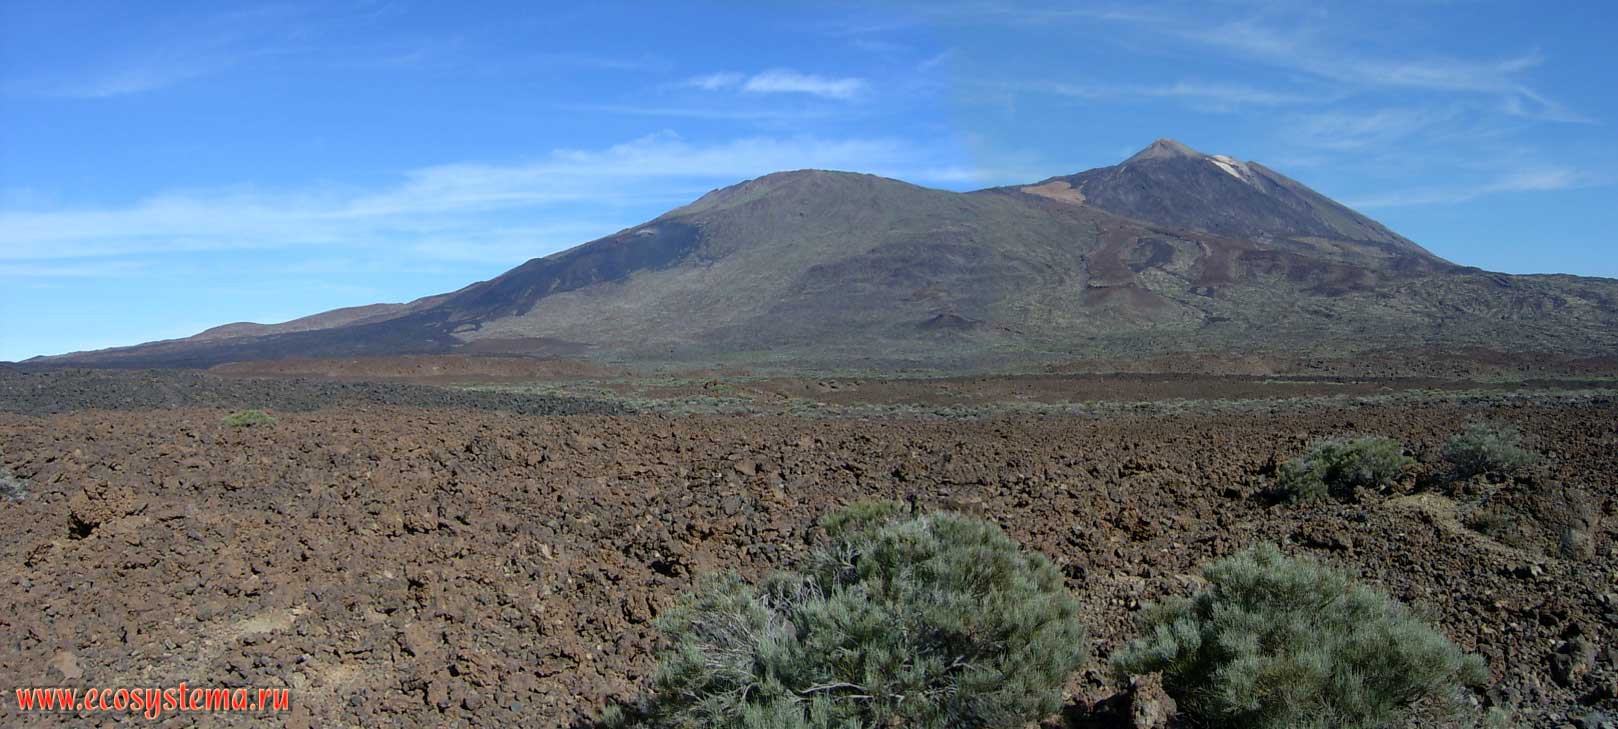 The panorama of the Las Canadas caldera with two volcanic cones: the Teide (Pico del Teide, 3718 meters height) and Pico Viejo (3134 meters height).
The lava age is 2000 years (red colour) and 300 years (black colour). Shooting point is at 2500 meters above sea level. Tenerife Island, Canary Archipelago